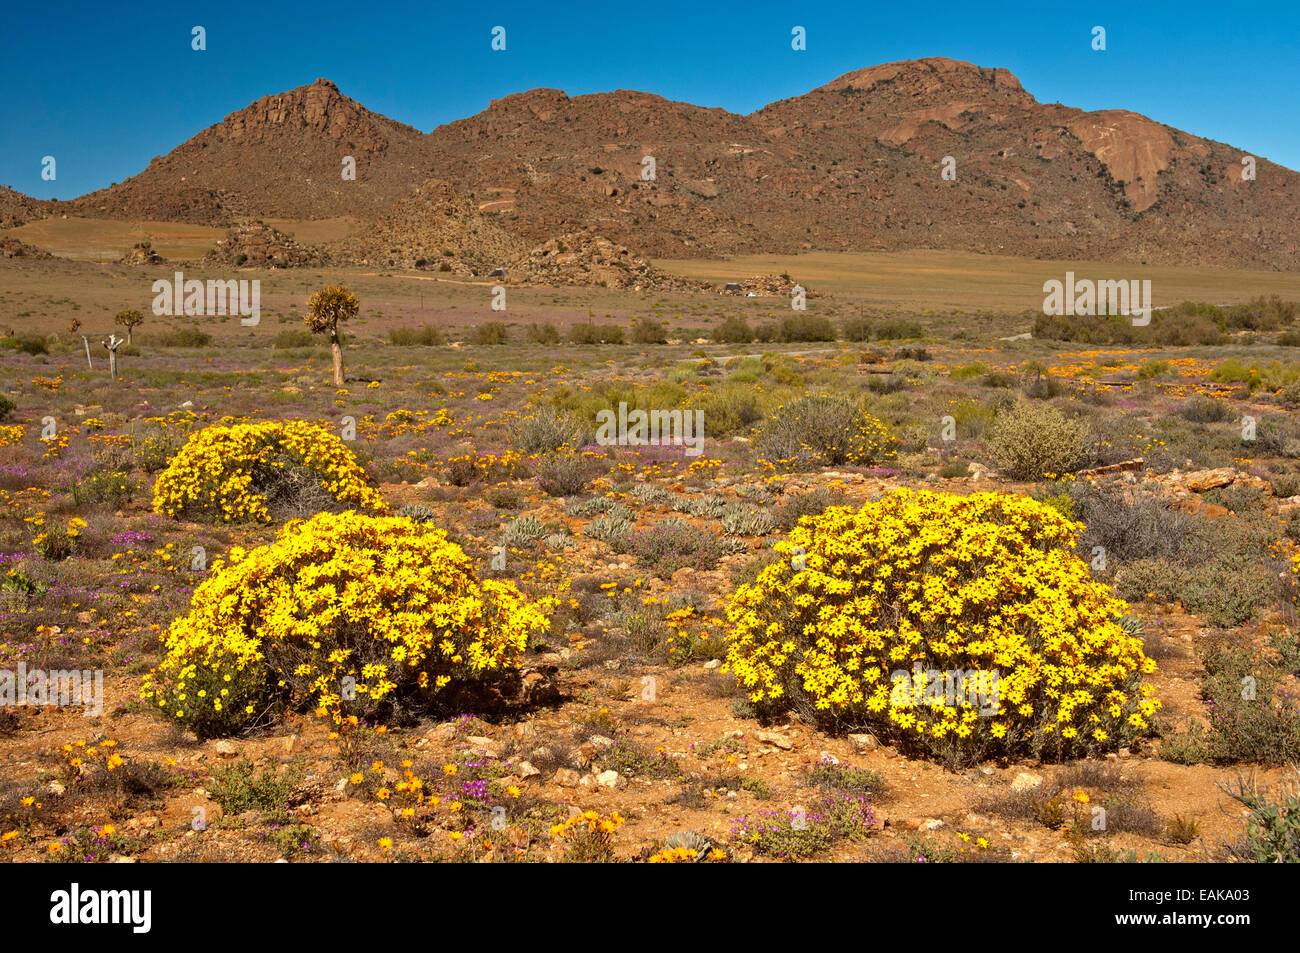 Yellow flowers of the Skaapbos Shrub, African Daisy, South African Daisy or Cape Daisy (Tripteris oppositifolia), Namaqualand Stock Photo